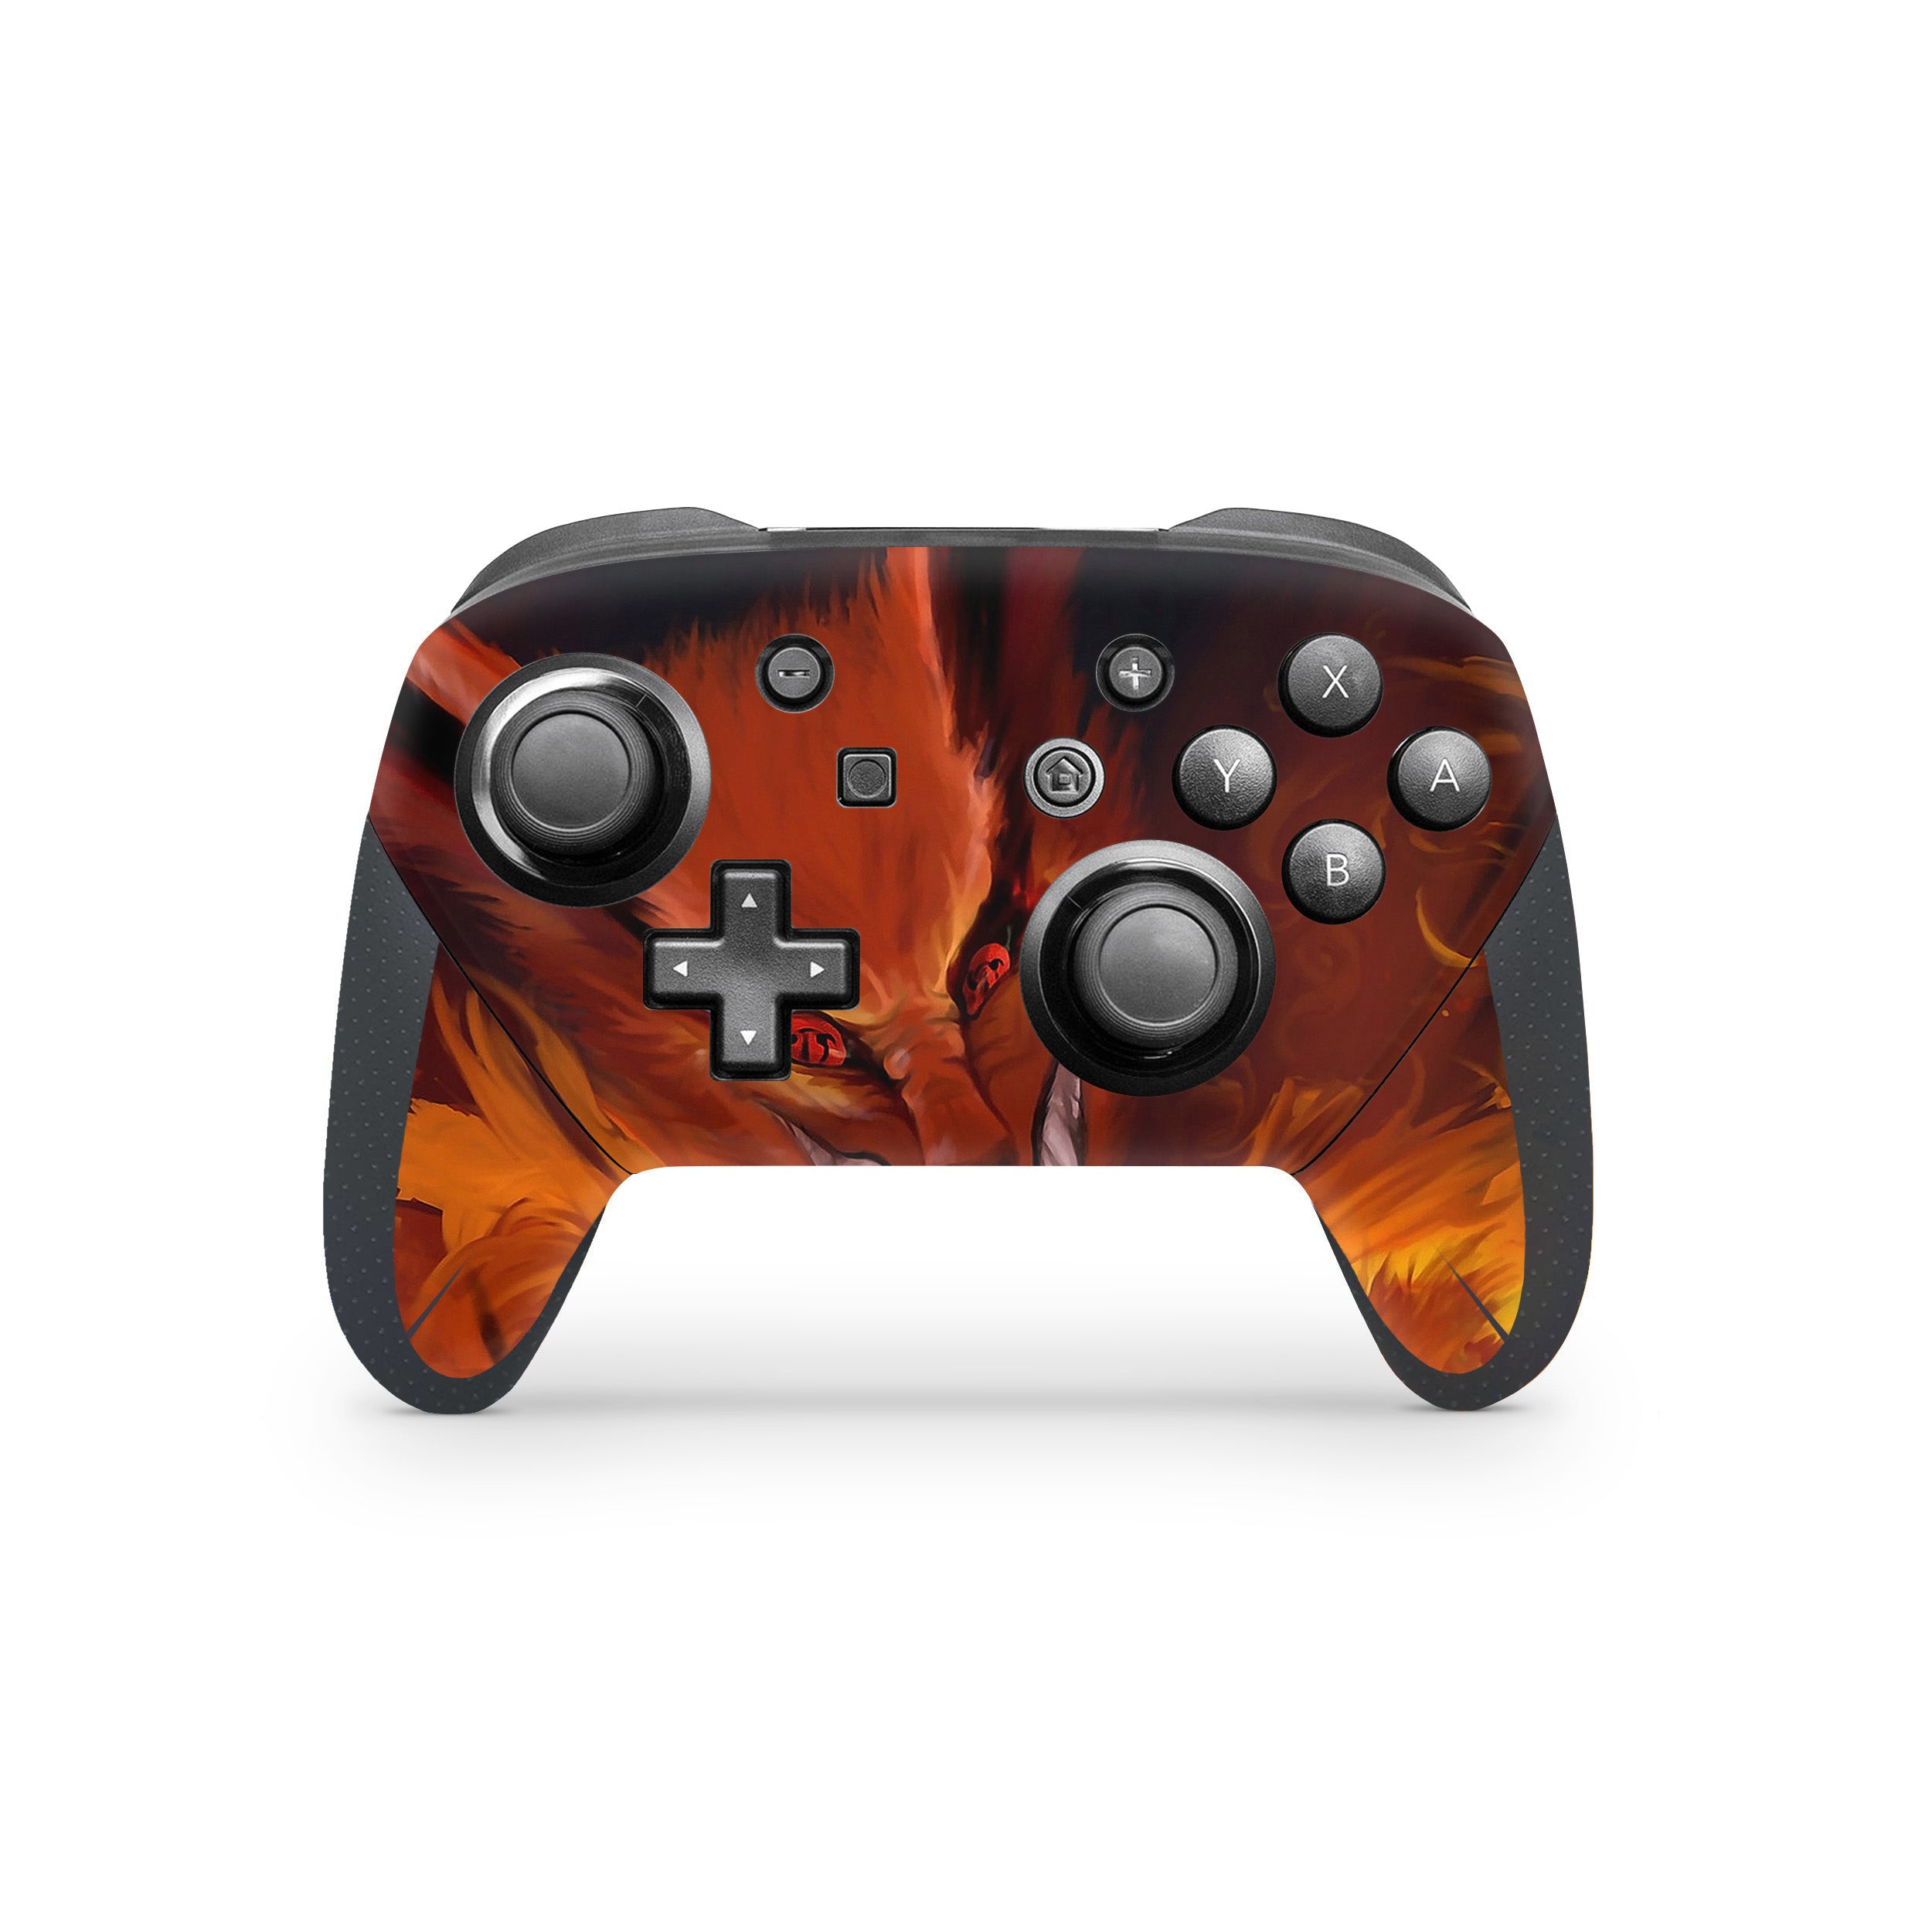 A video game skin featuring a Naruto Fire Wolf design for the Switch Pro Controller.